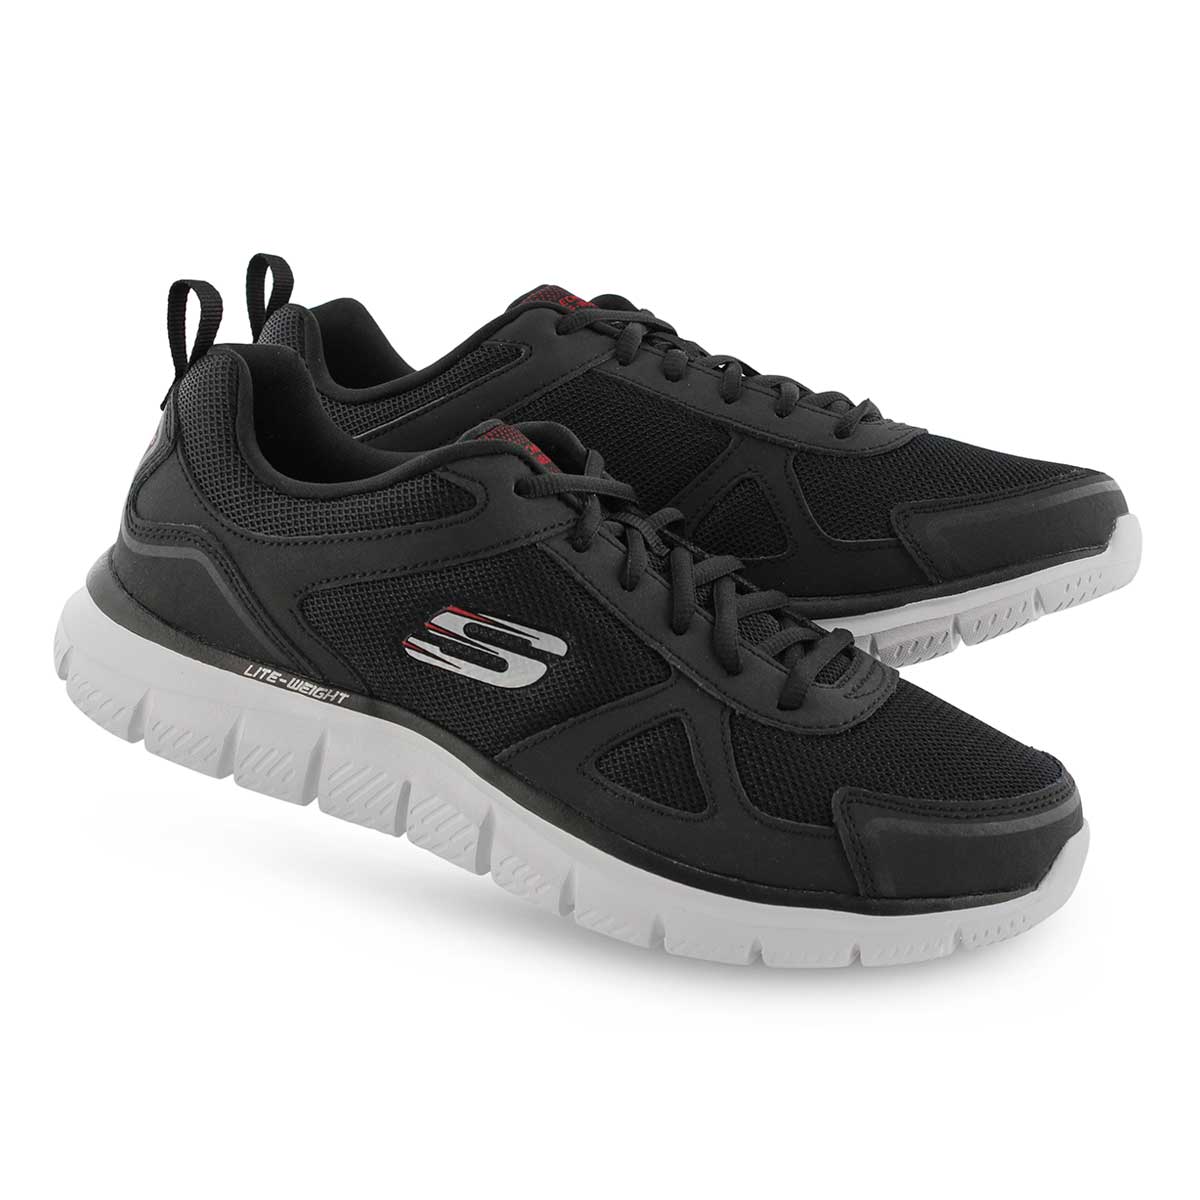 skechers track scloric review